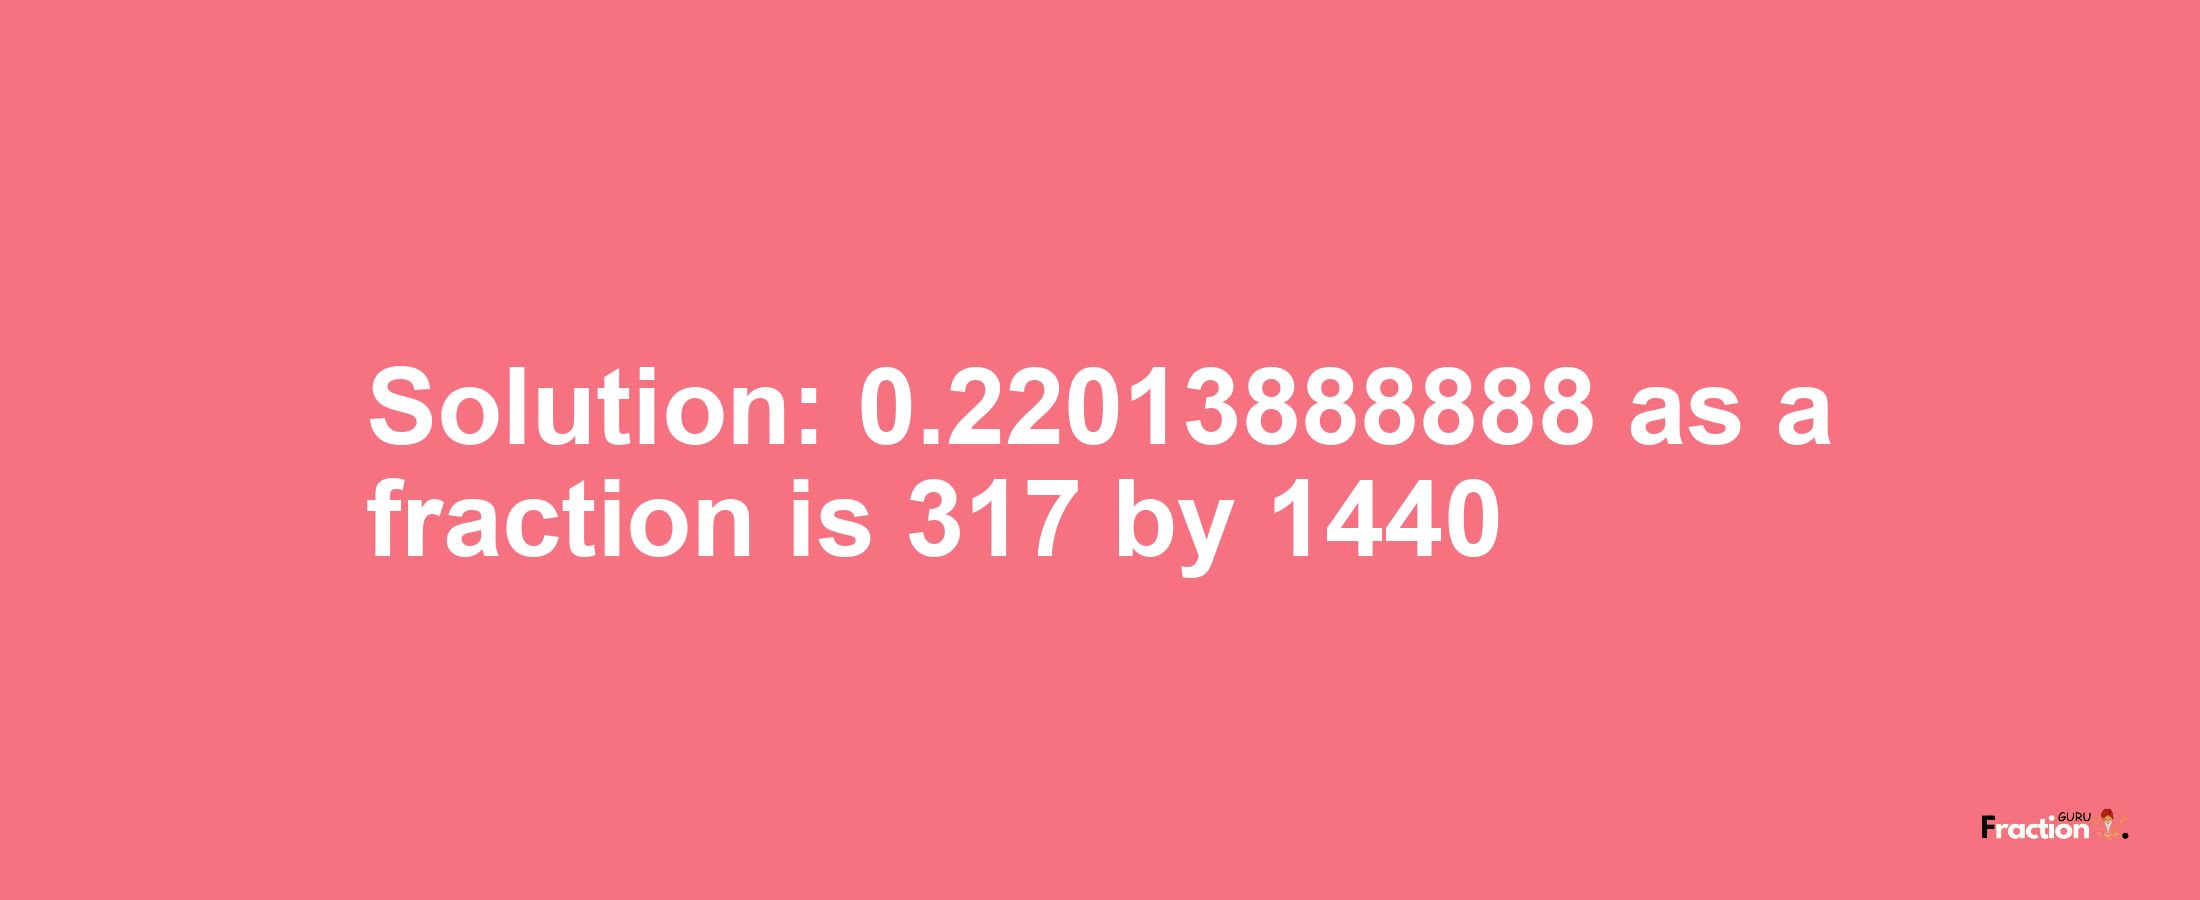 Solution:0.22013888888 as a fraction is 317/1440